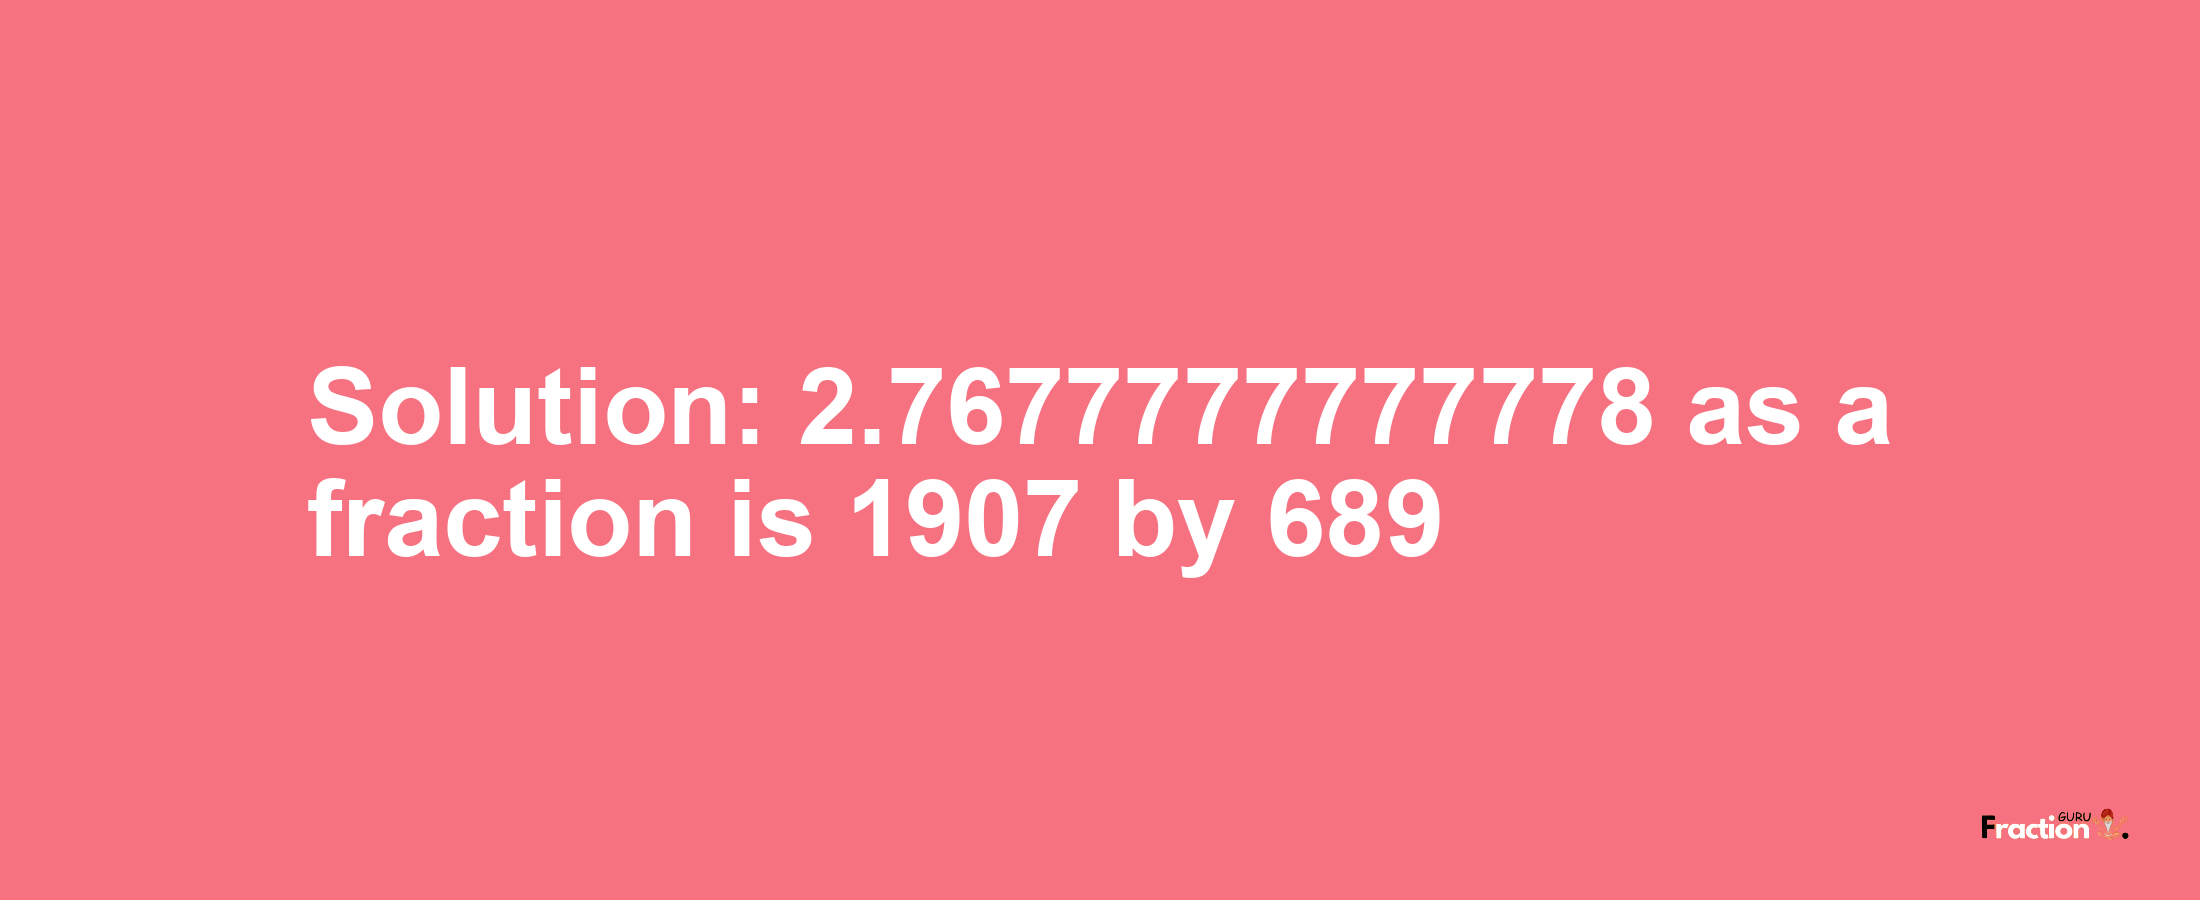 Solution:2.7677777777778 as a fraction is 1907/689